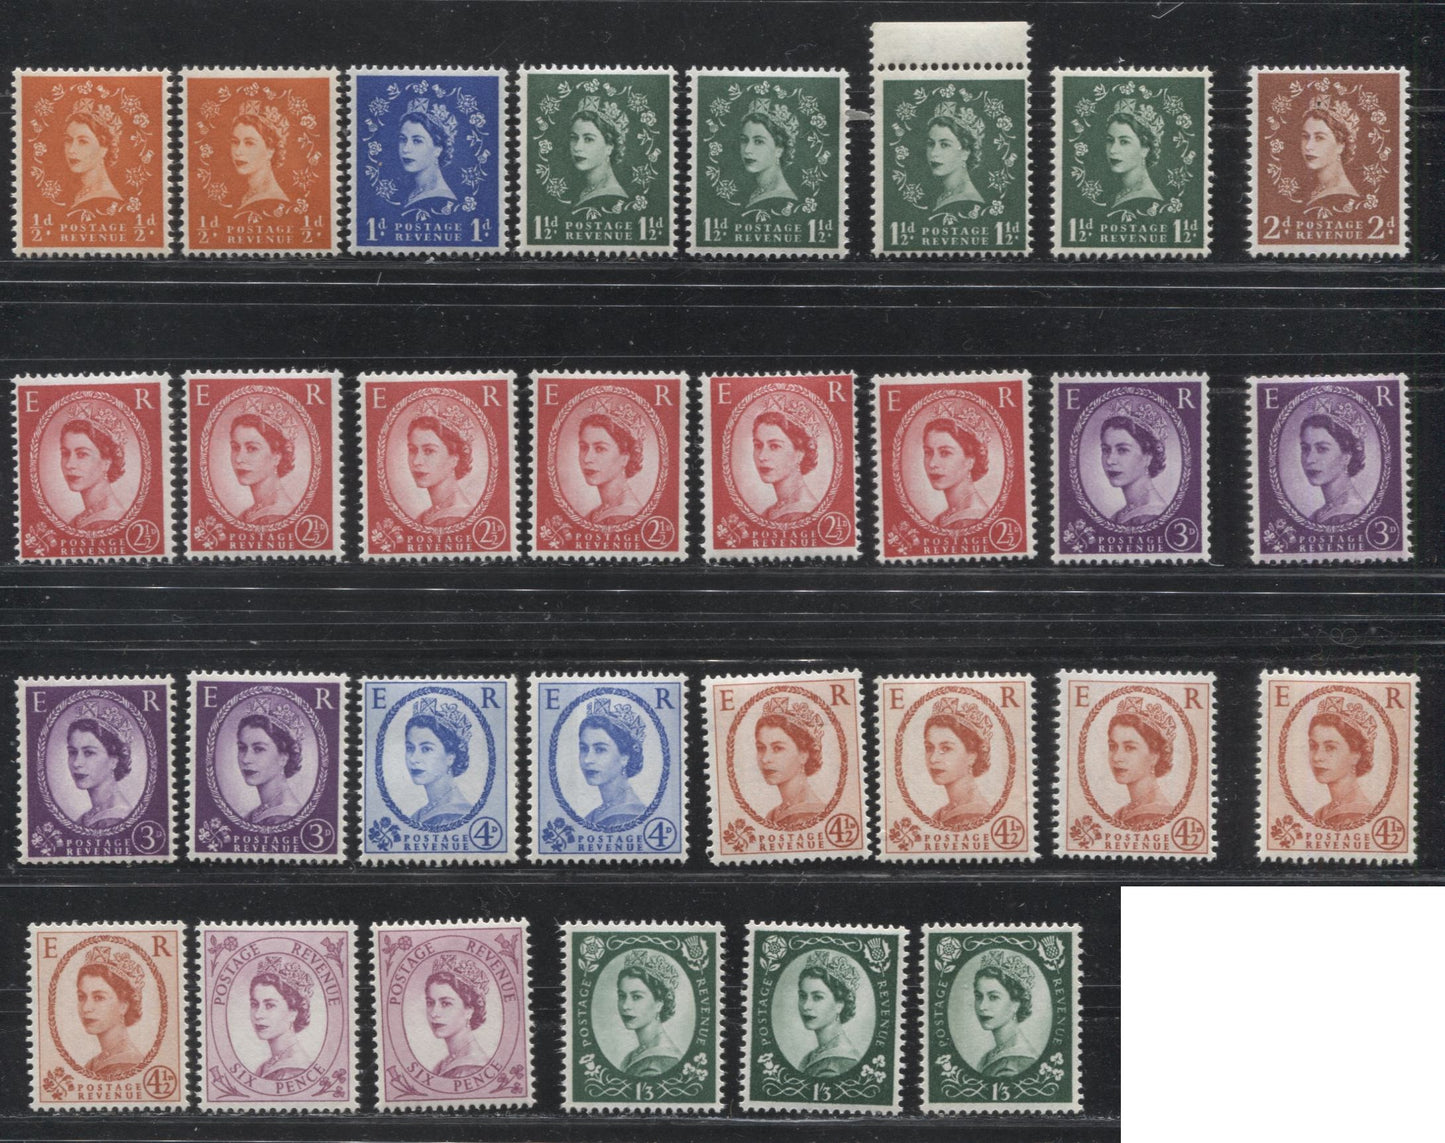 Great Britain SC#353p/368p SG#610/618 1/2d Orange - 1/3d Green Queen Elizabeth II, 1960-1967 Wilding Issue, Multiple Crown Watermark, Phosphor Tagged Issue, Partial Set, Blue Phosphor on White Paper, Many Fluorscent Varieties, Fine to Very Fine NH